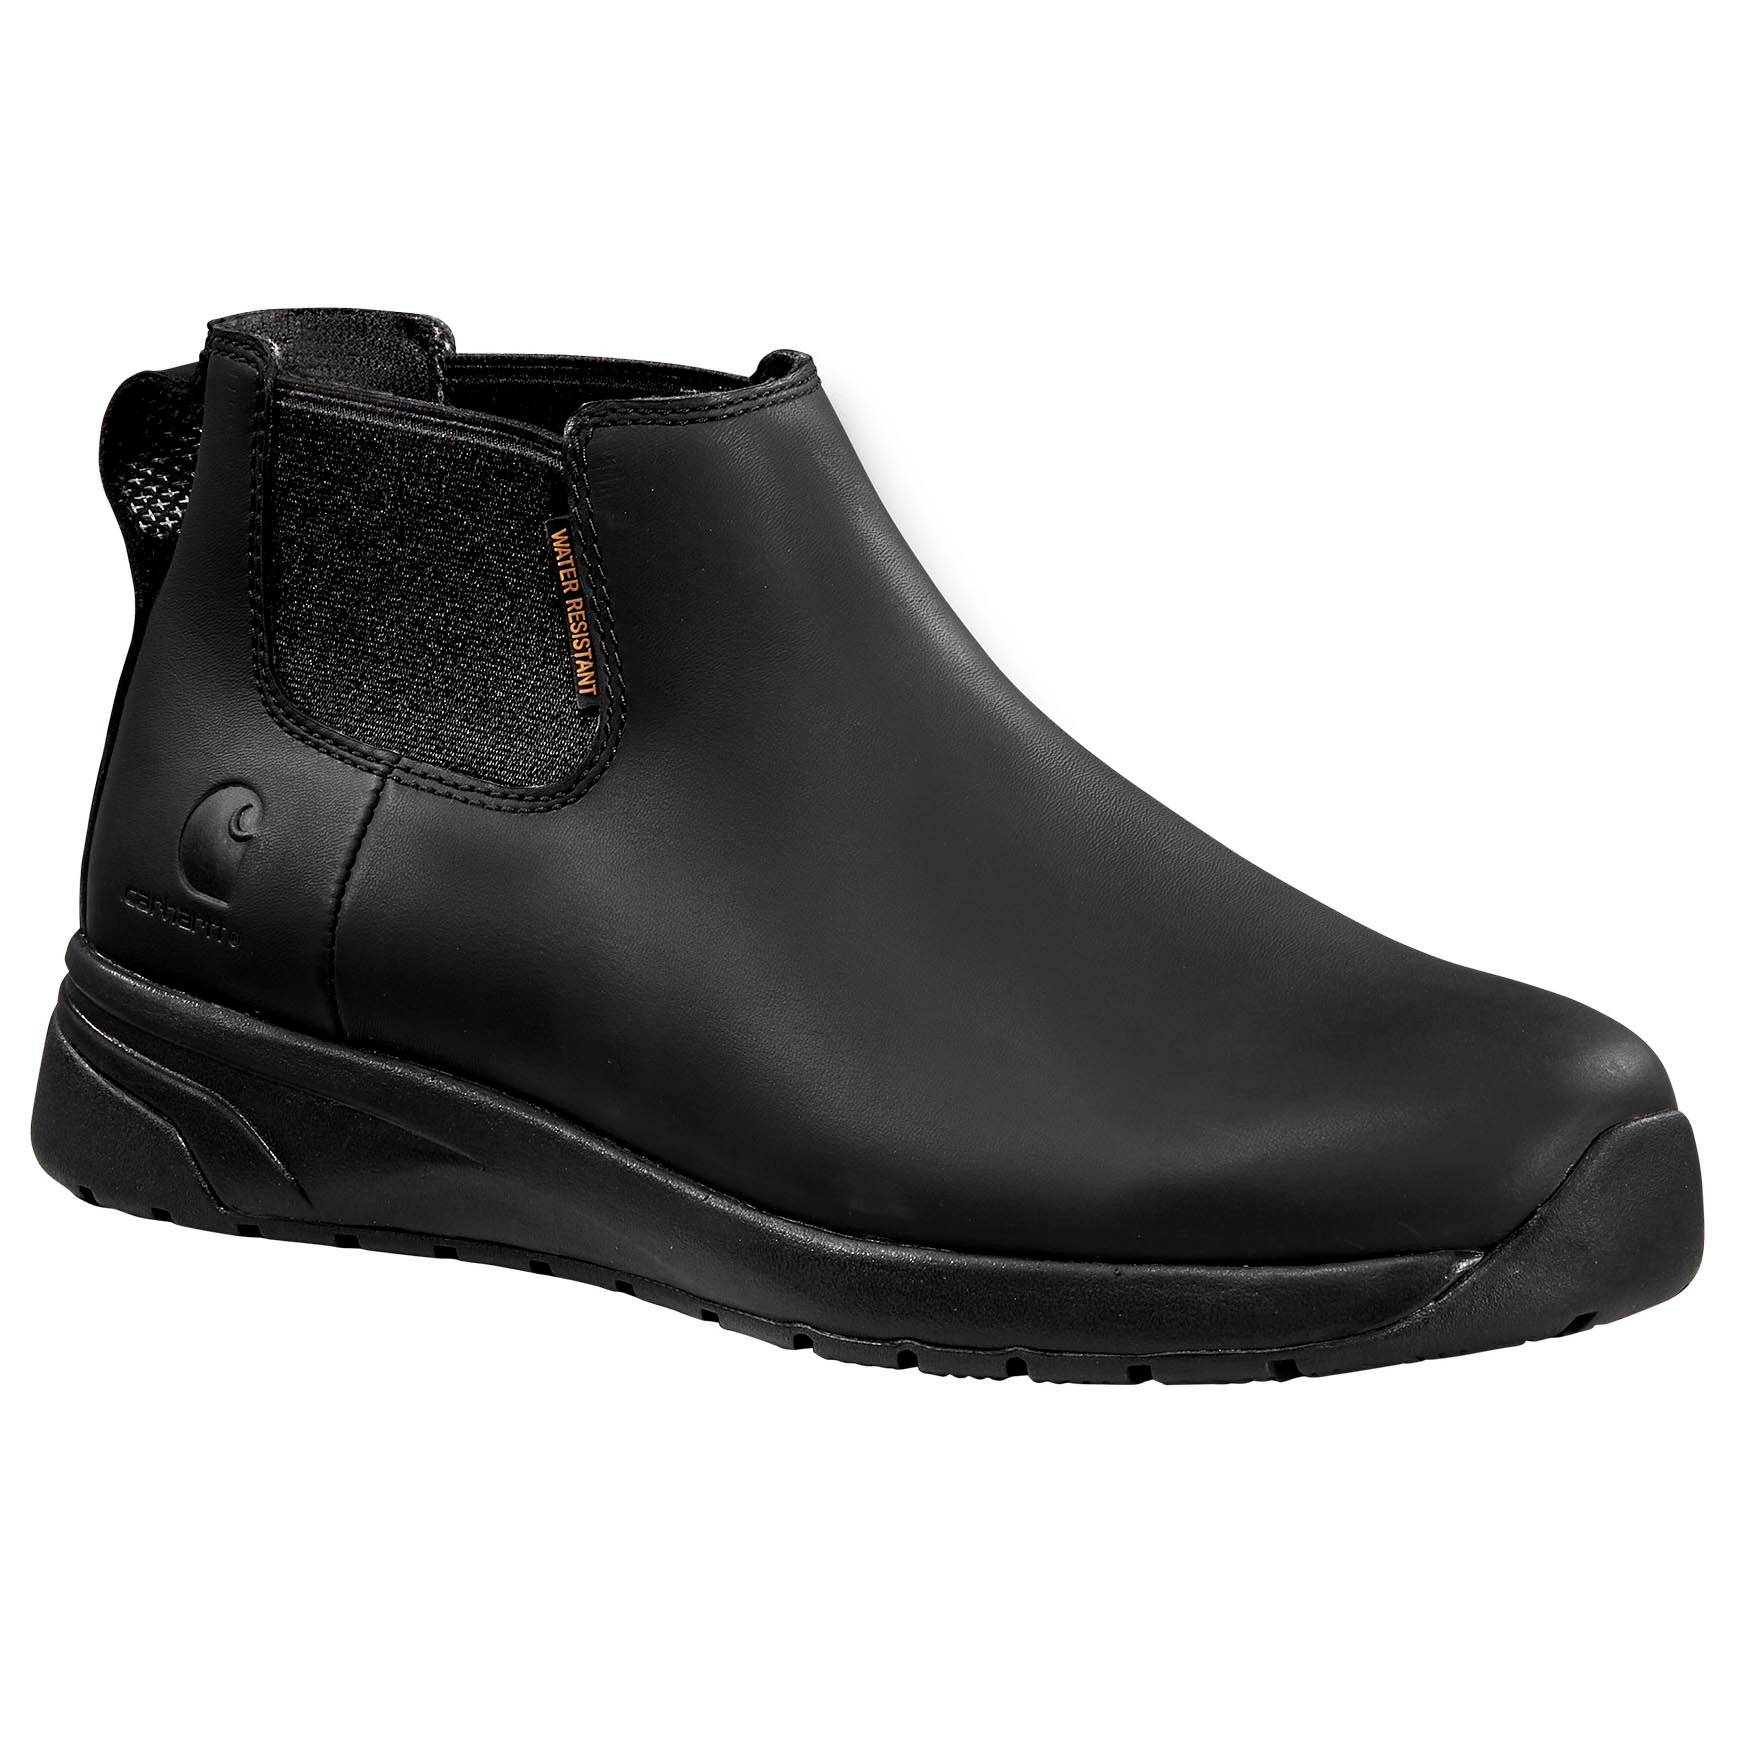 Carhartt Force 4" Water Resistant Safety Toe Romeo Boots